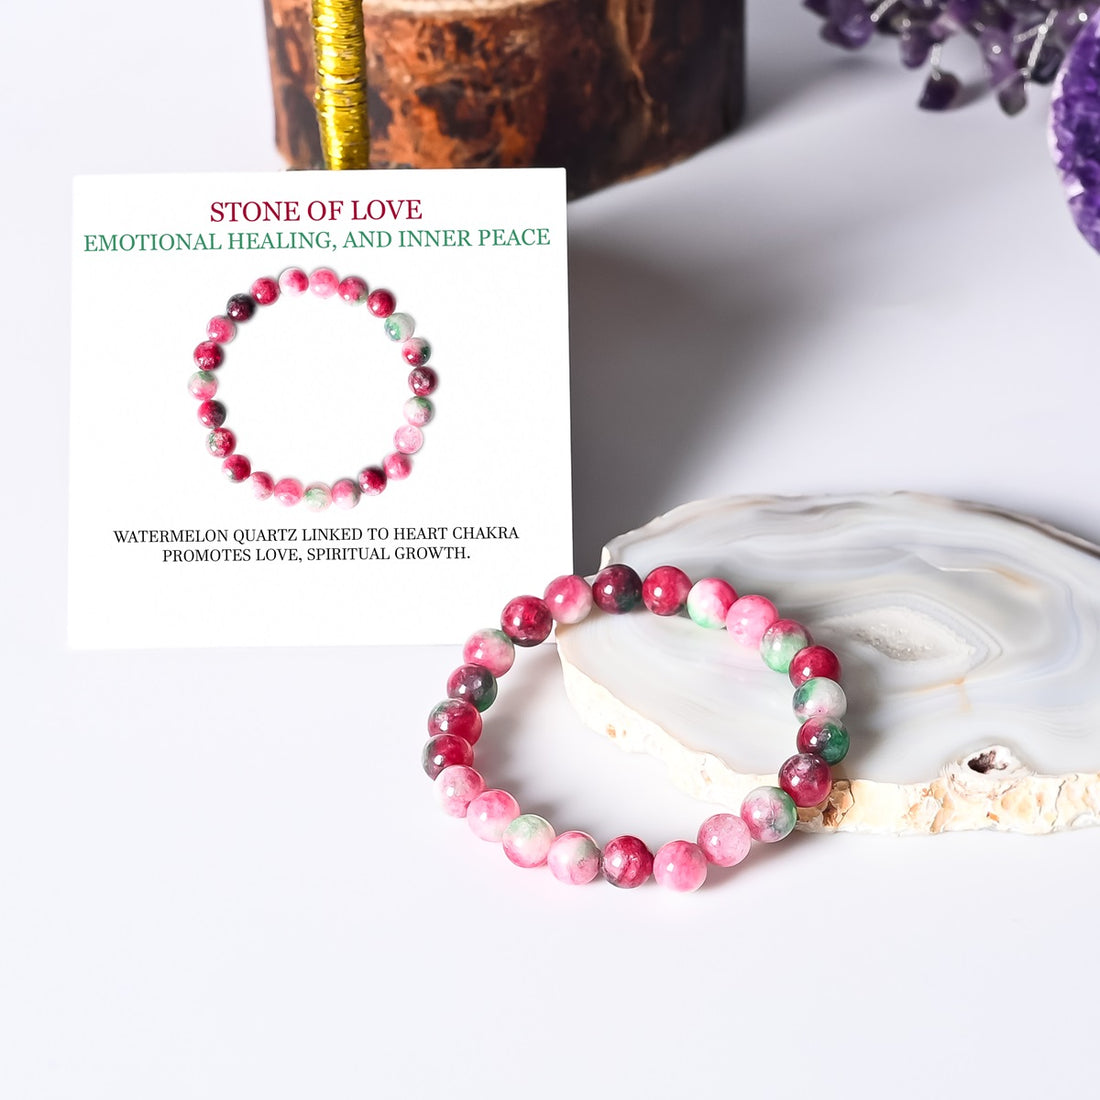 Artistic representation symbolizing love, featuring the Watermelon Quartz Stretch Bracelet as a token of affection and positive emotional energies